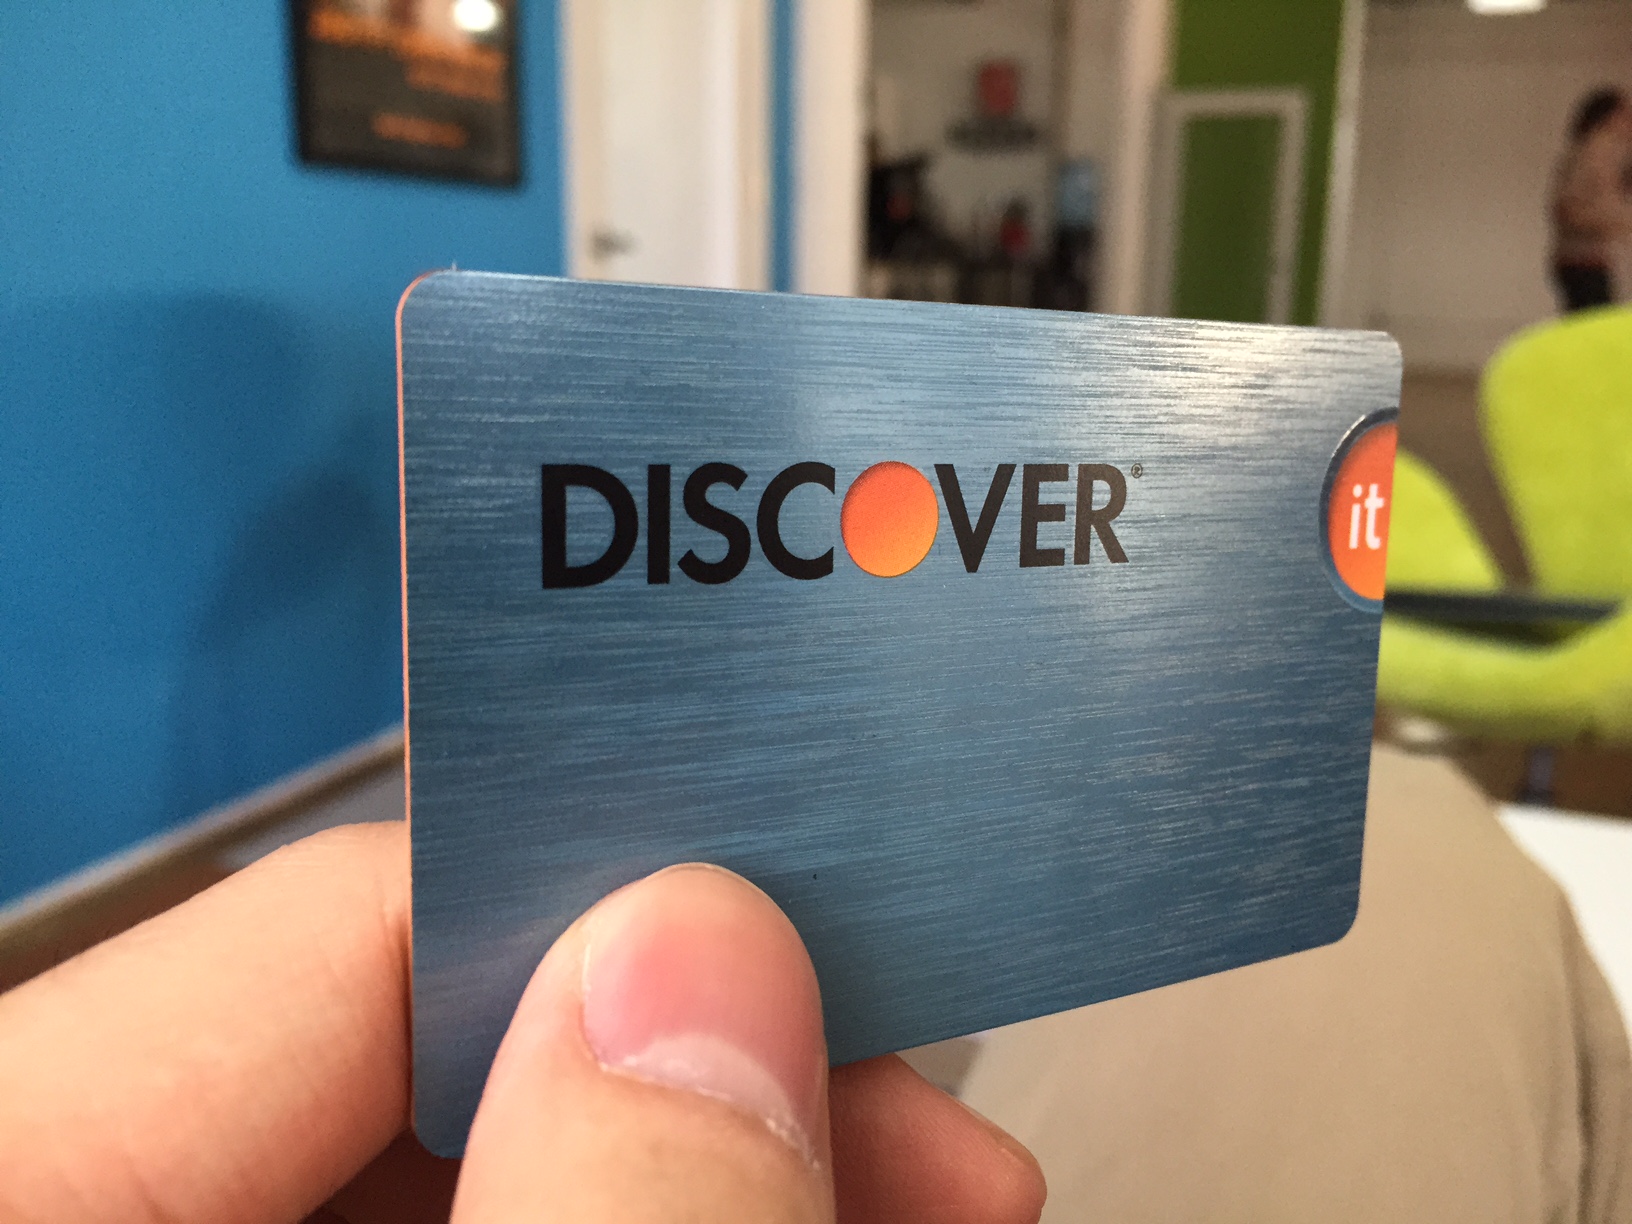                      Discover it Review                             
                     